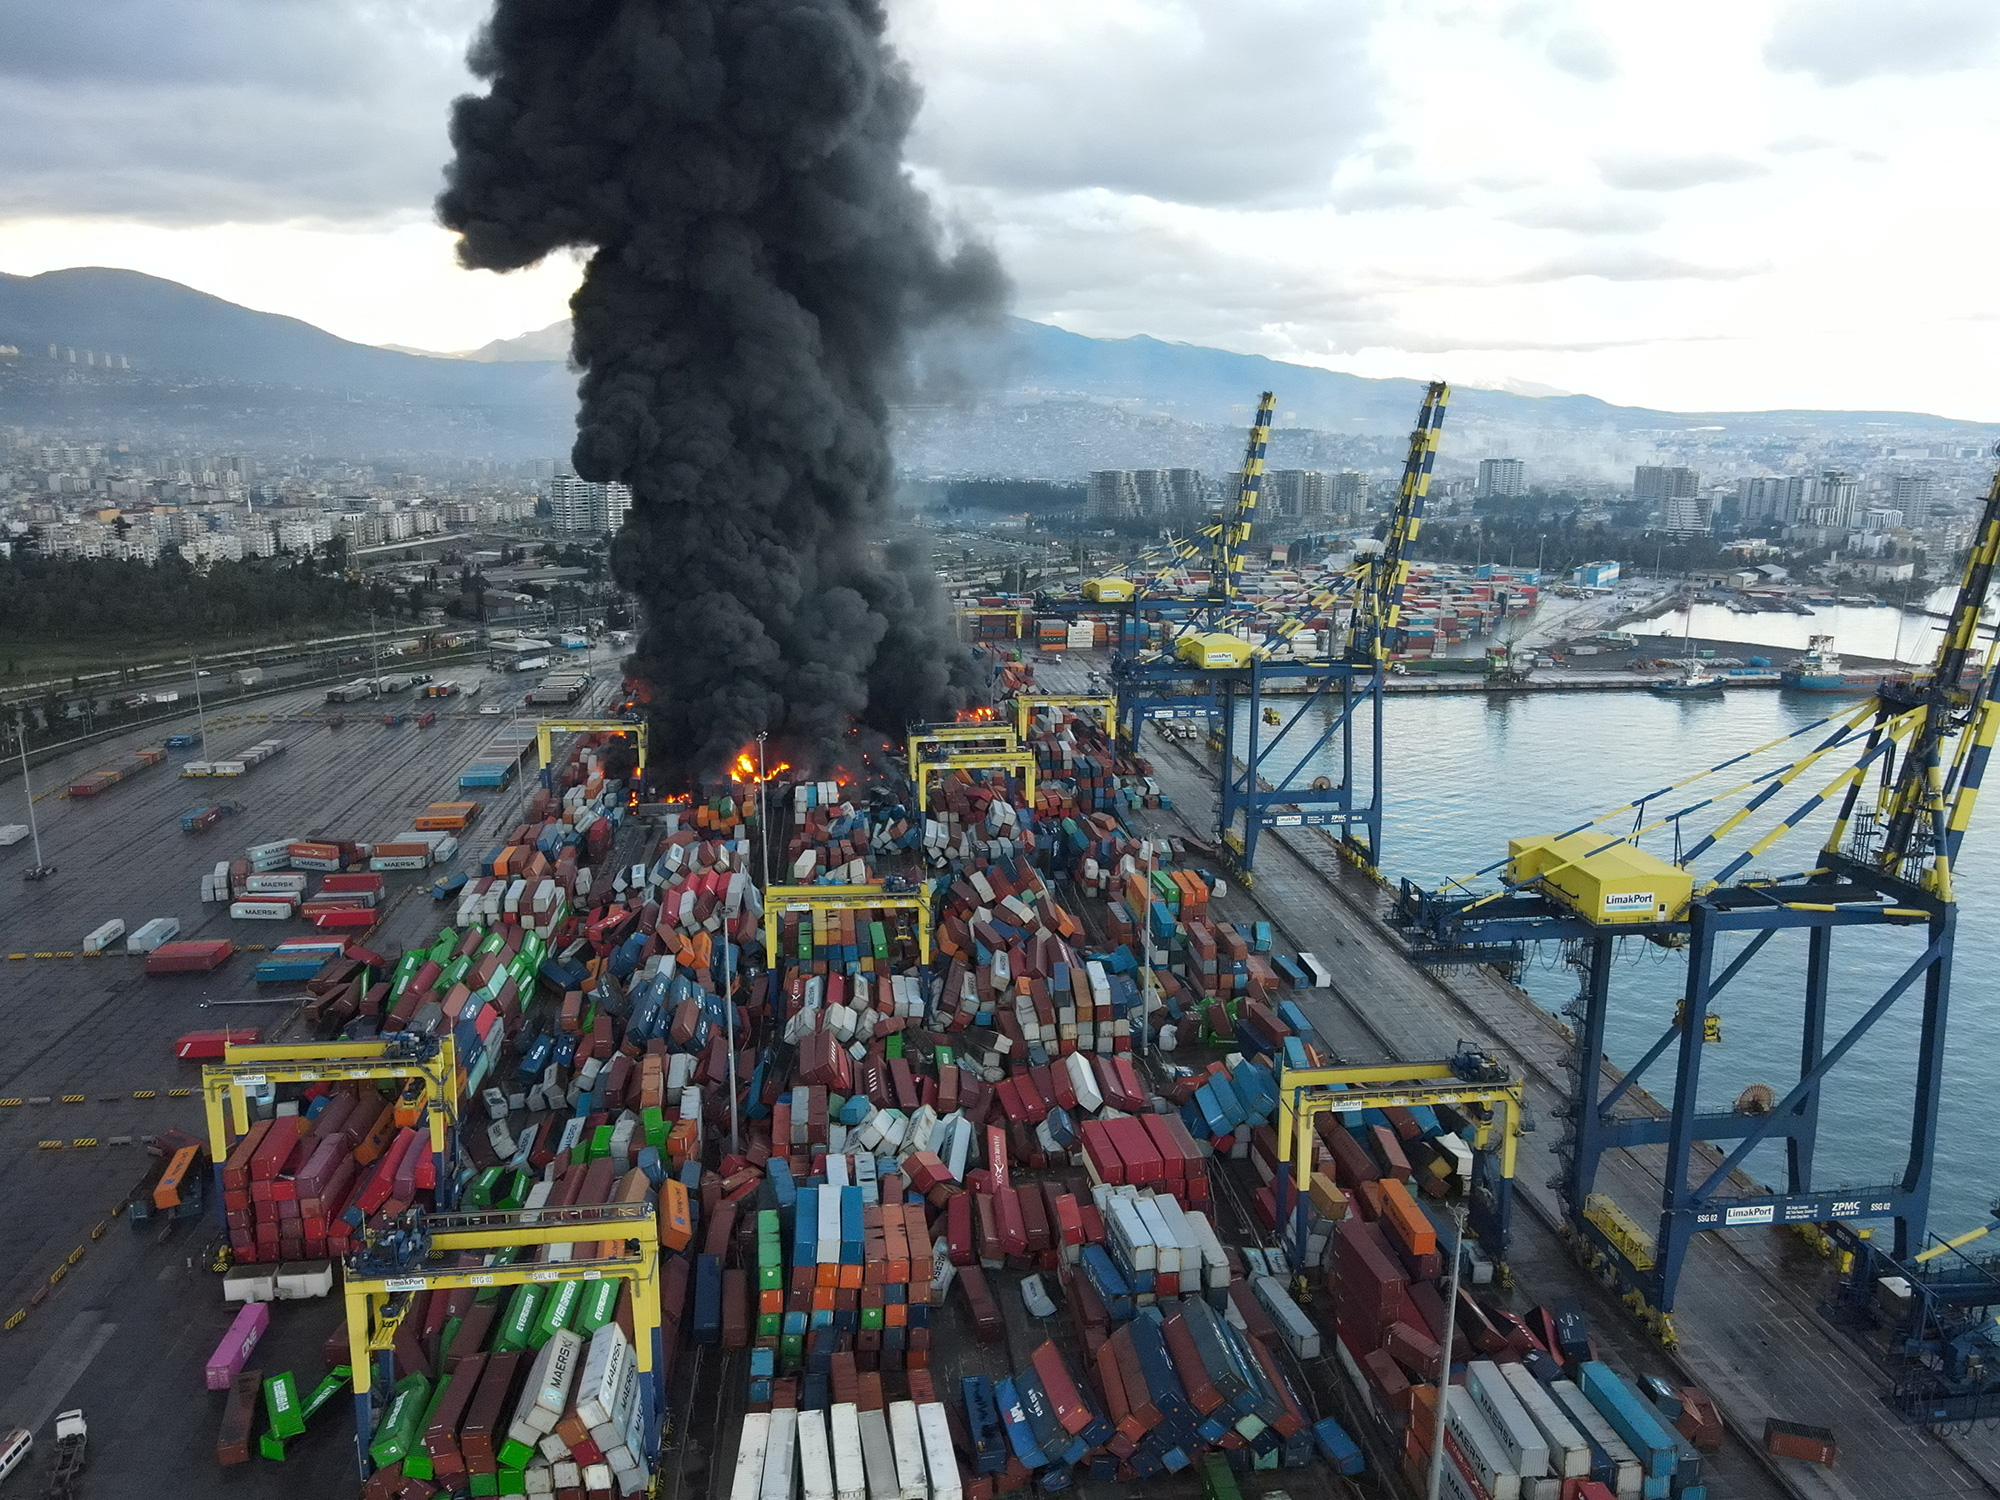 Black smoke rises from a fire at the Iskenderun port in Iskenderun, Turkey.